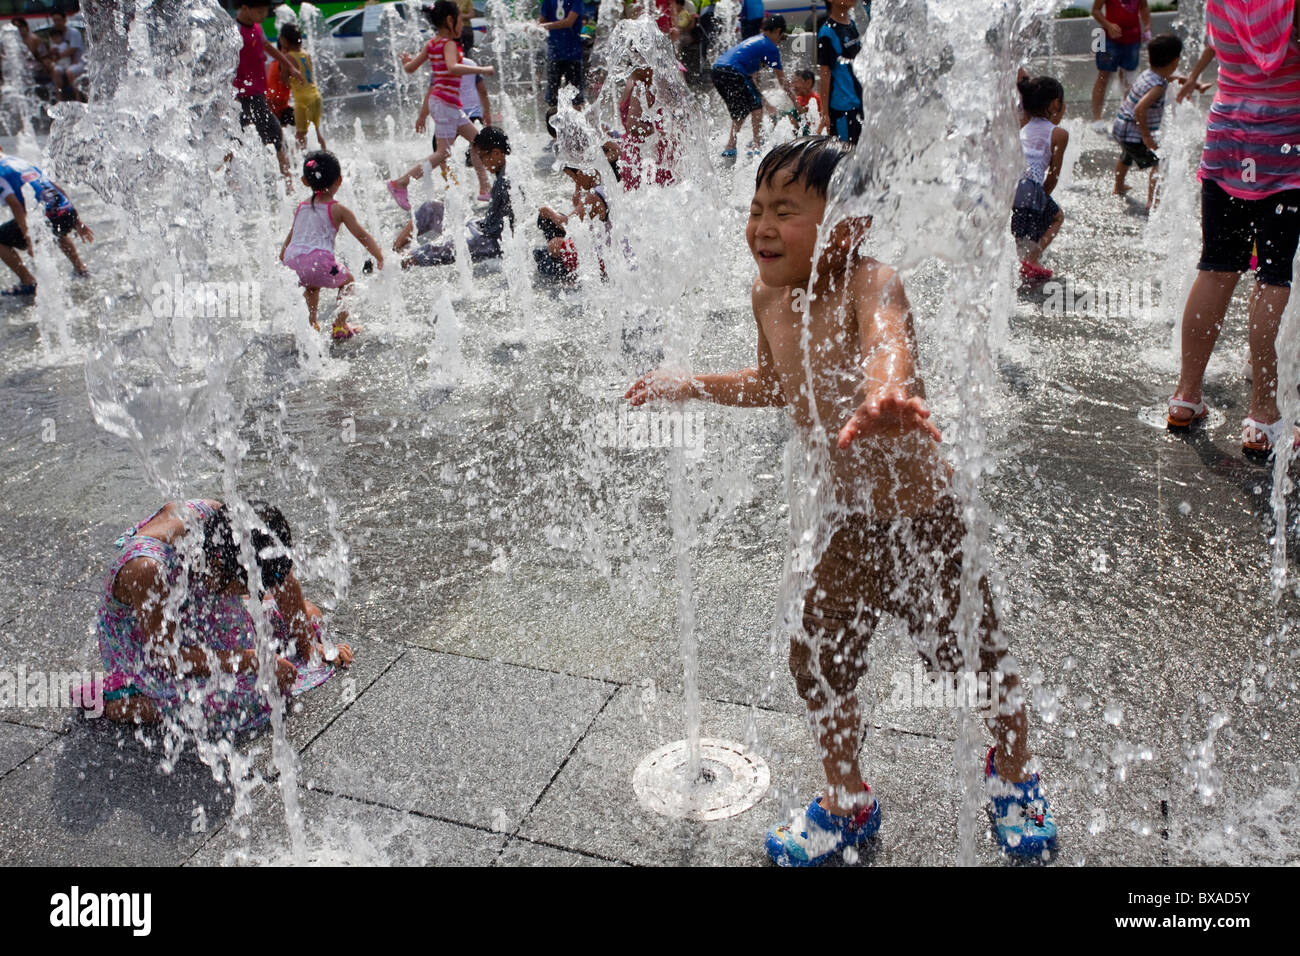 Children play in water fountains in Sejong in Seoul, South Korea Stock Photo